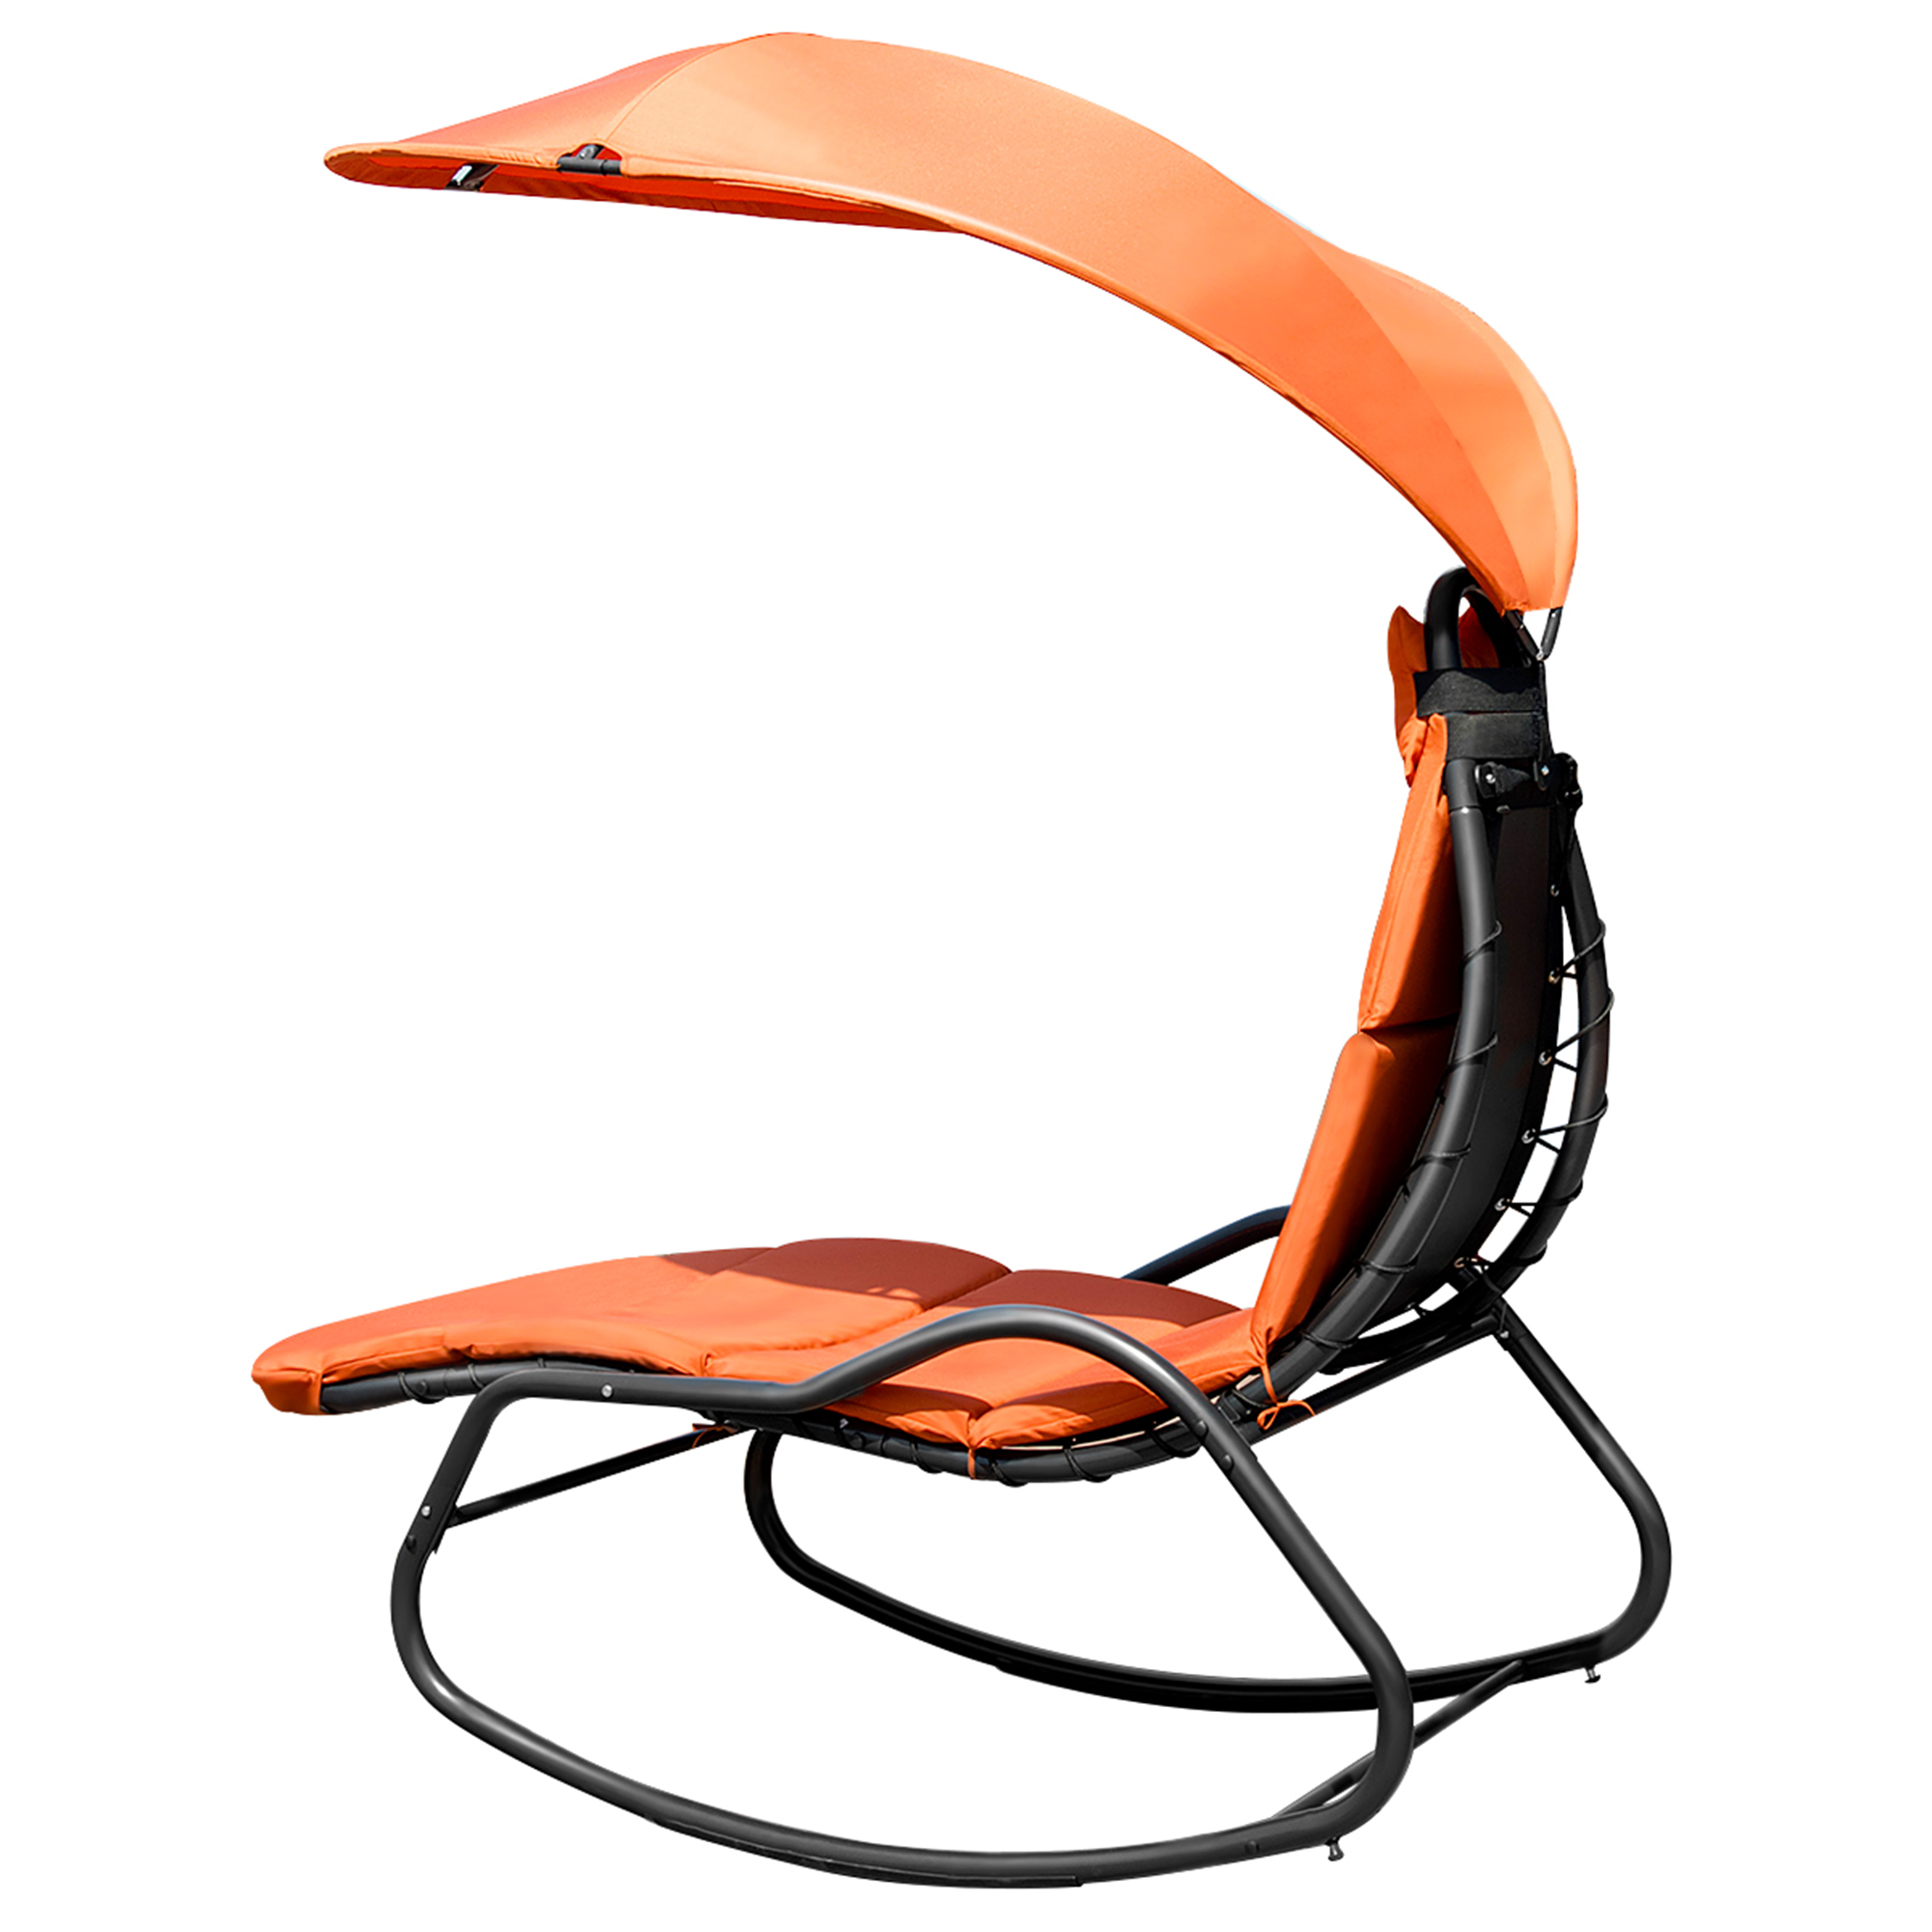 Gymax Patio Lounge Chair Chaise Garden w/ Steel Frame Cushion Canopy Orange - image 4 of 10